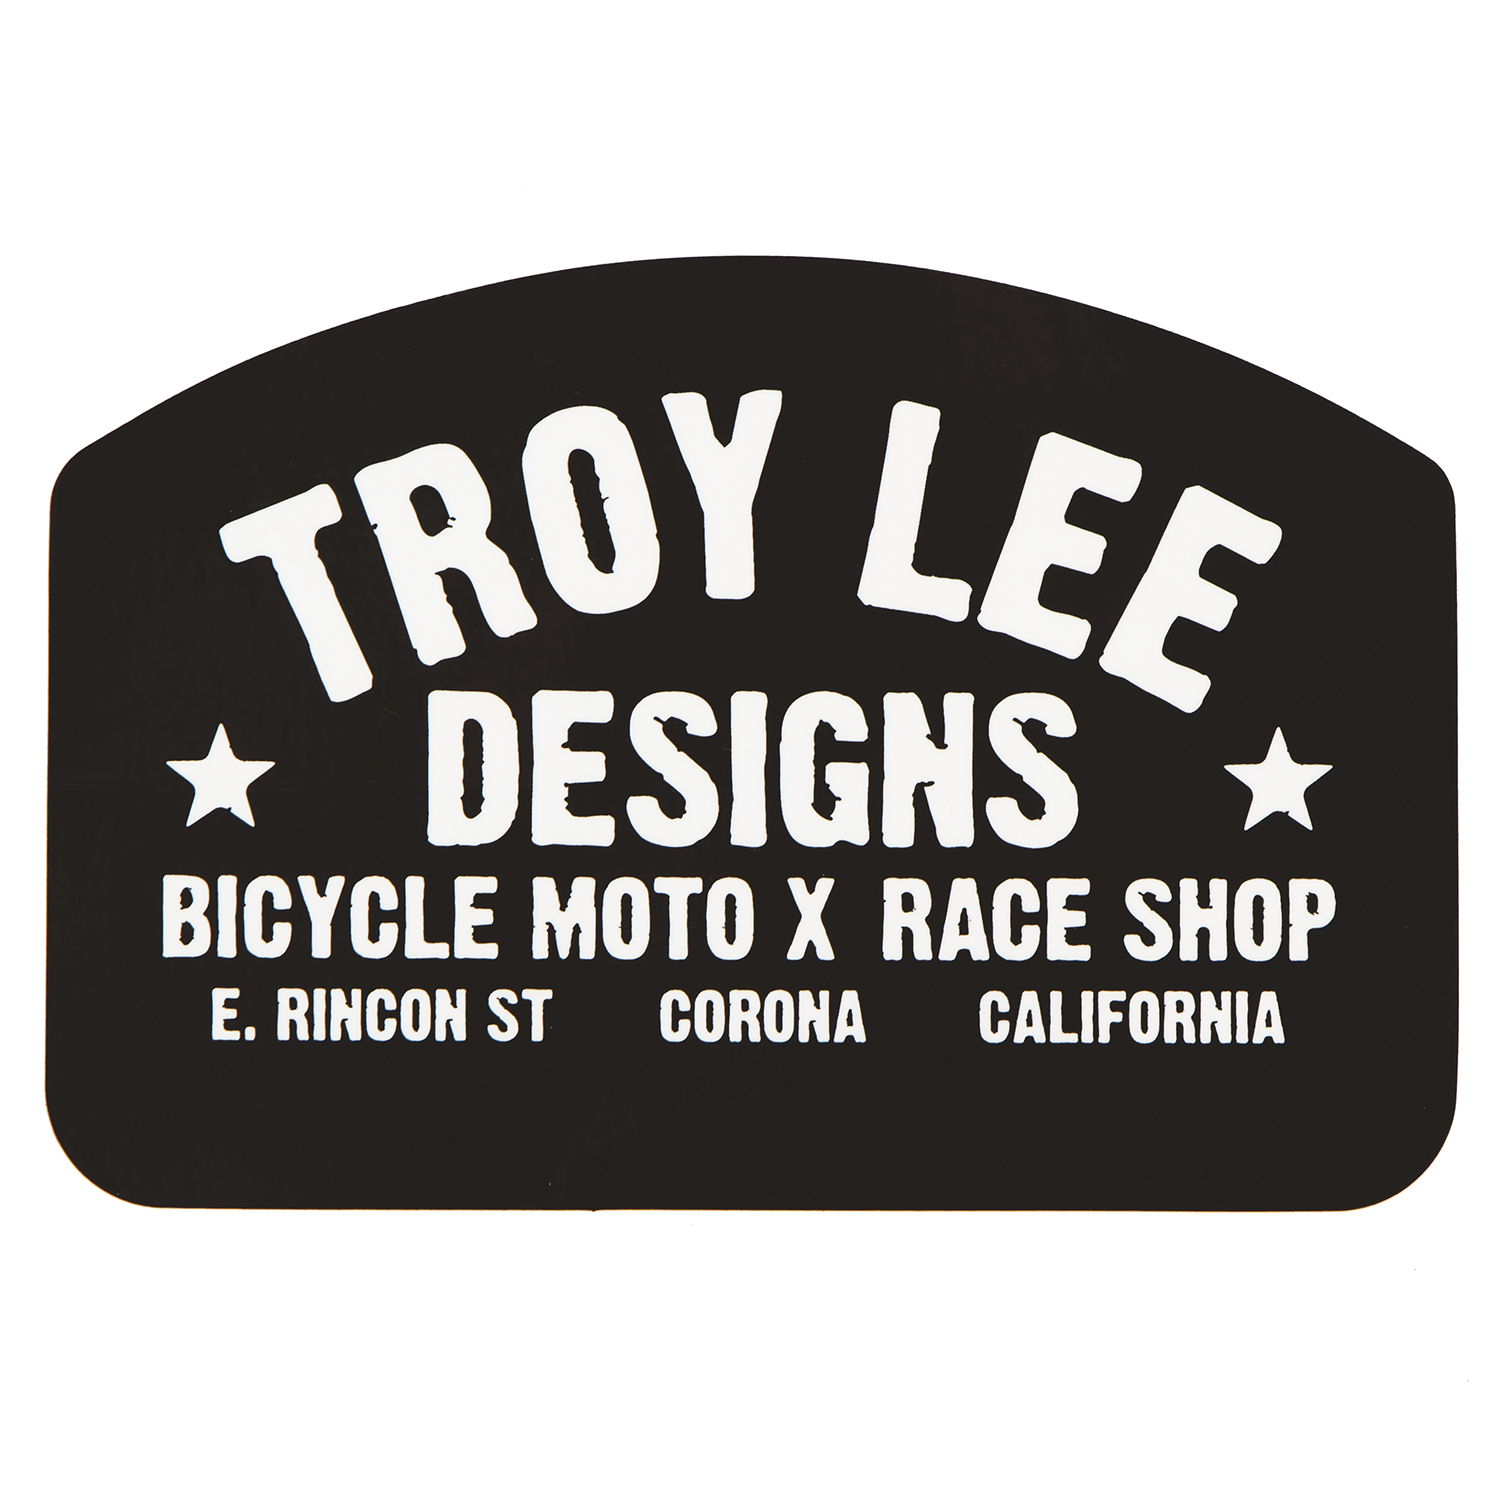 Troy Lee Designs Sticker Race Shop Black/White - 3.5 inches